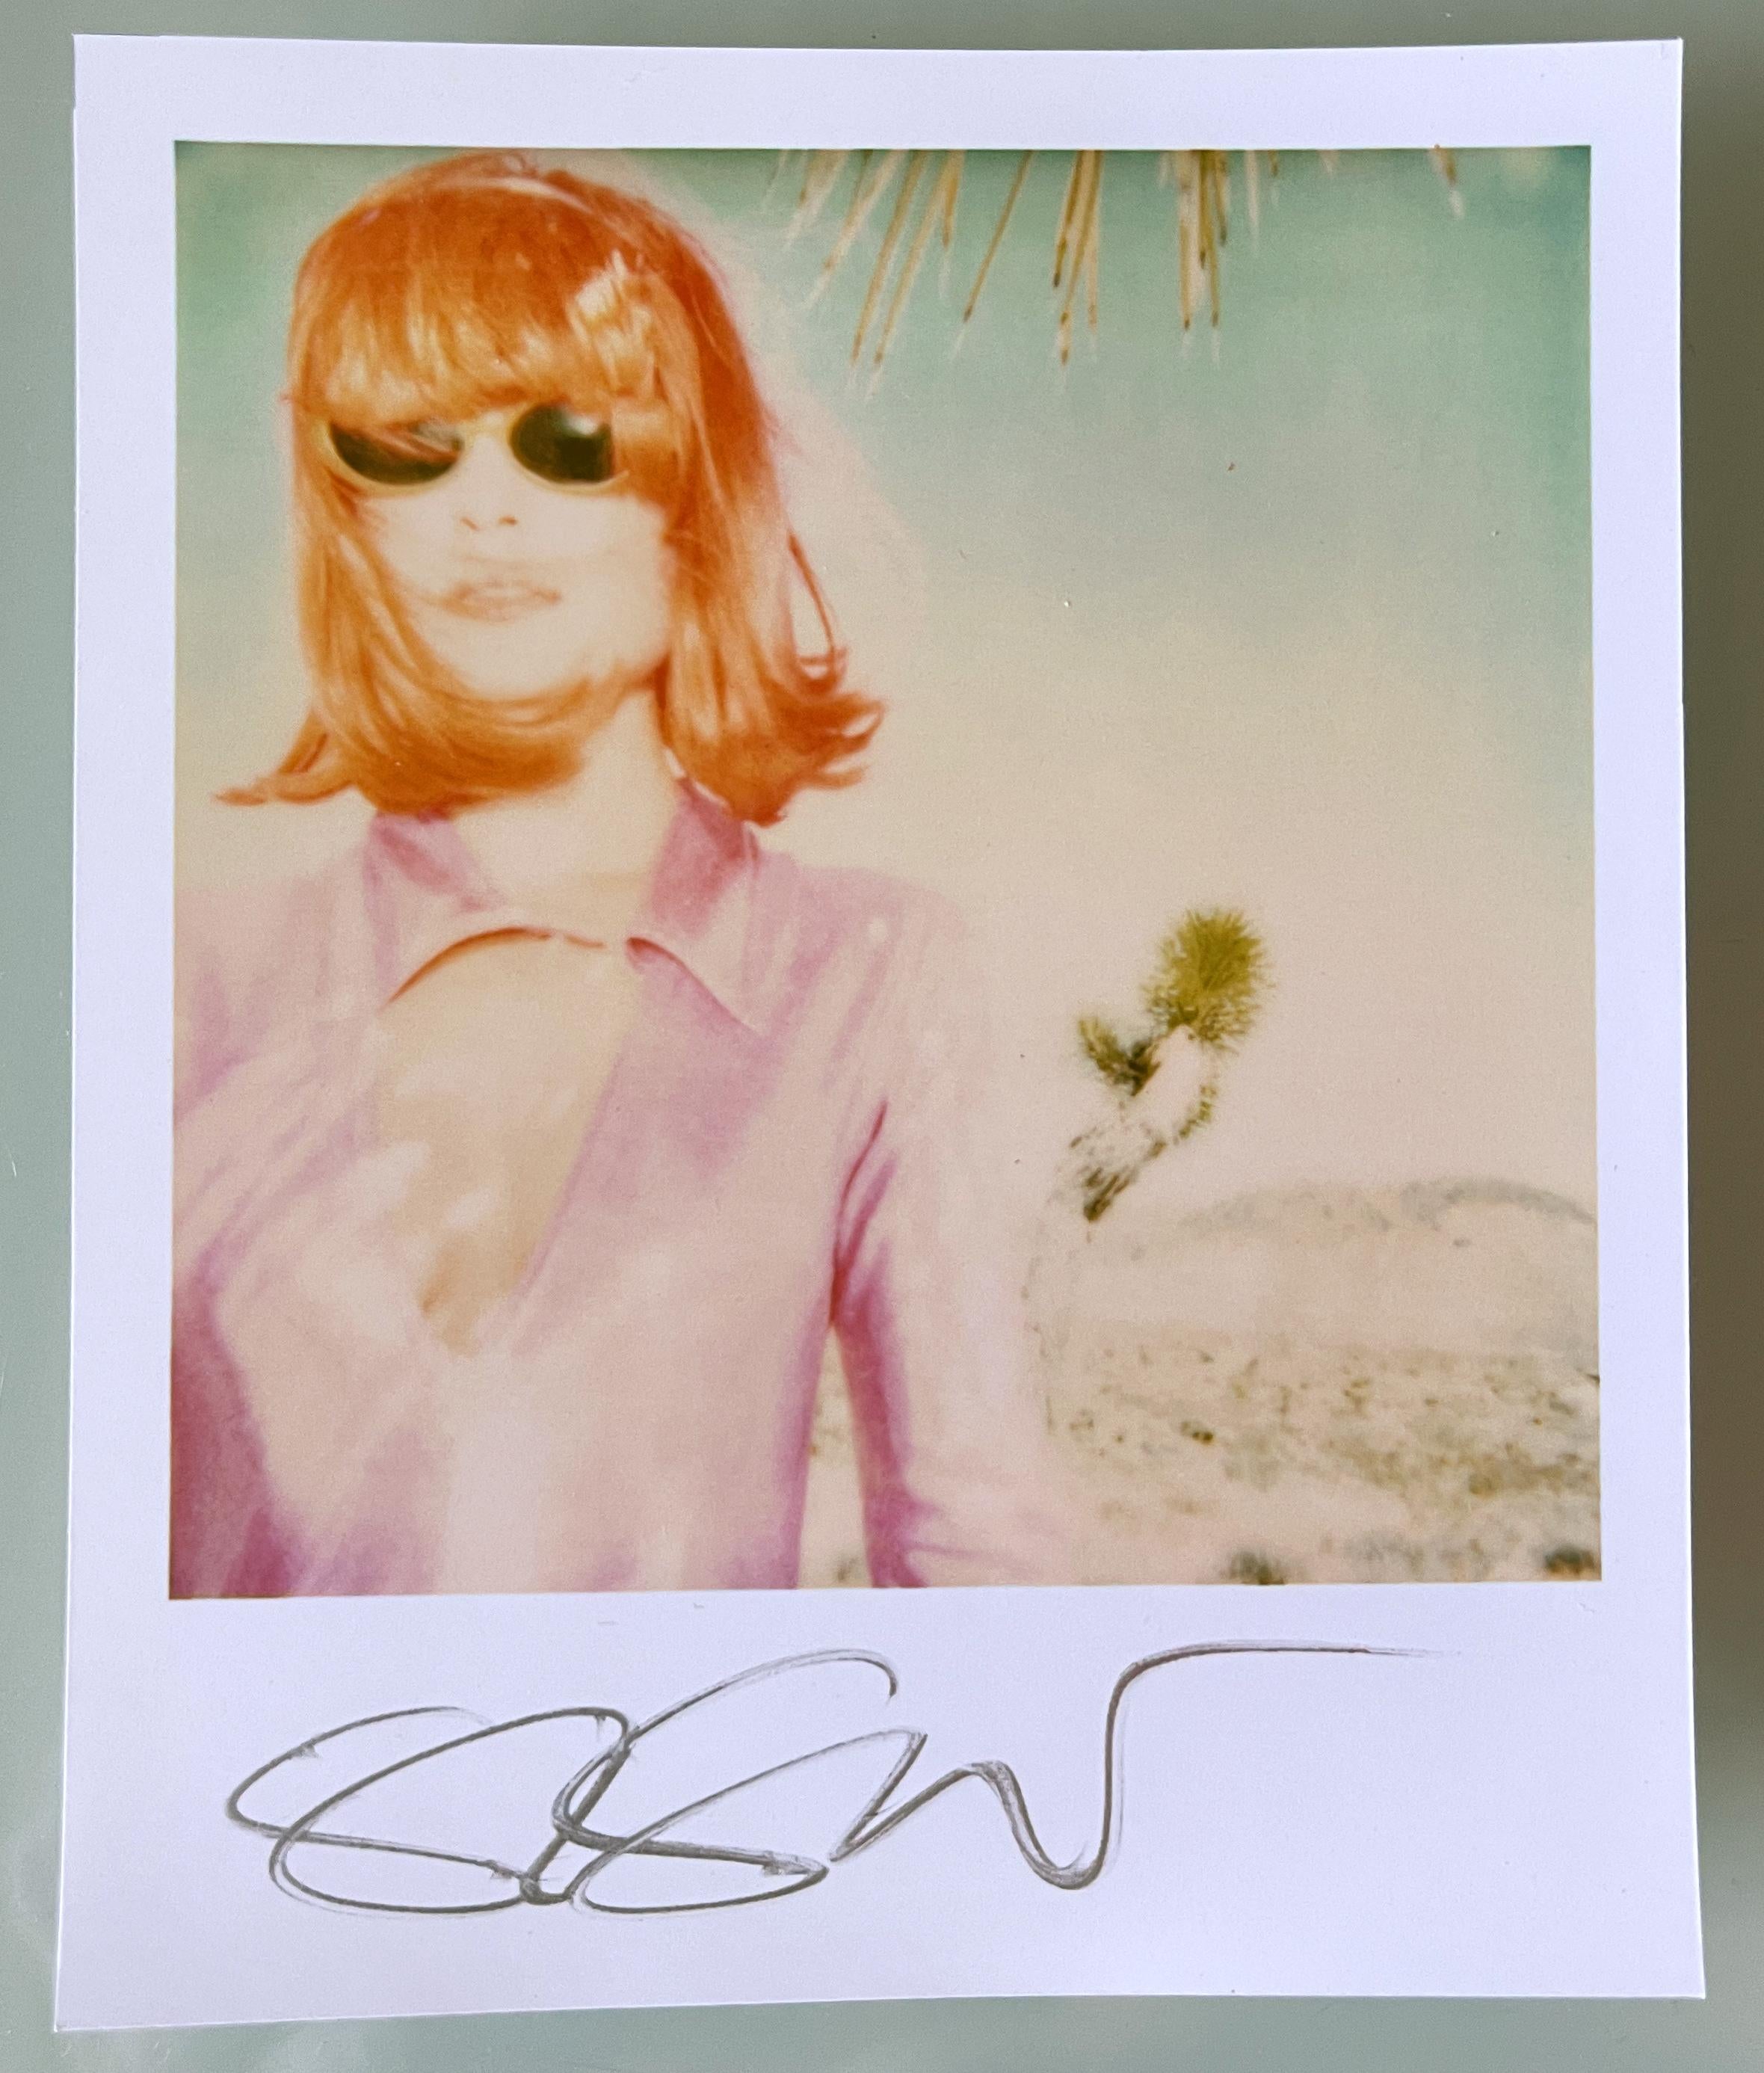 Stefanie Schneider Polaroid sized unlimited Mini 'Long Way Home' - 1999 - 

signed in front, not mounted. 
1 Digital Color Photographs based on a Polaroid. 

Polaroid sized open Editions 1999-2016
10.7 x 8.8cm (Image 7.9x7.7cm) each.

Stefanie